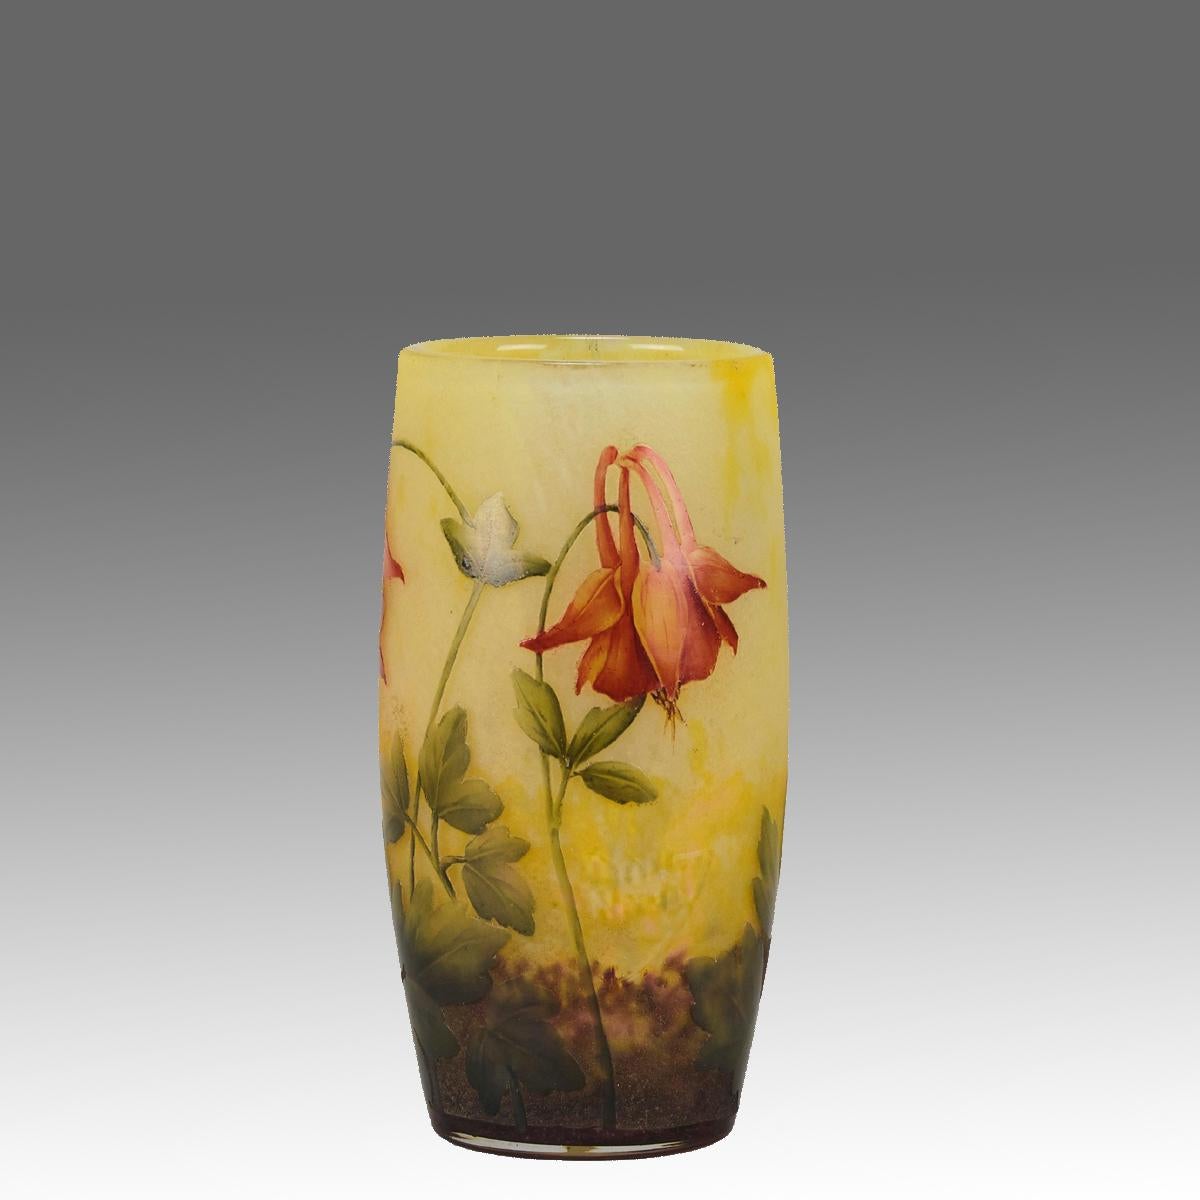 A very pretty early 20th Century Art Nouveau cameo glass vase etched and enamelled with red blooming Aquilegia flowers against a yellow field, exhibiting excellent colour and detail. Signed Daum Nancy with the Cross of Lorraine.
ADDITIONAL